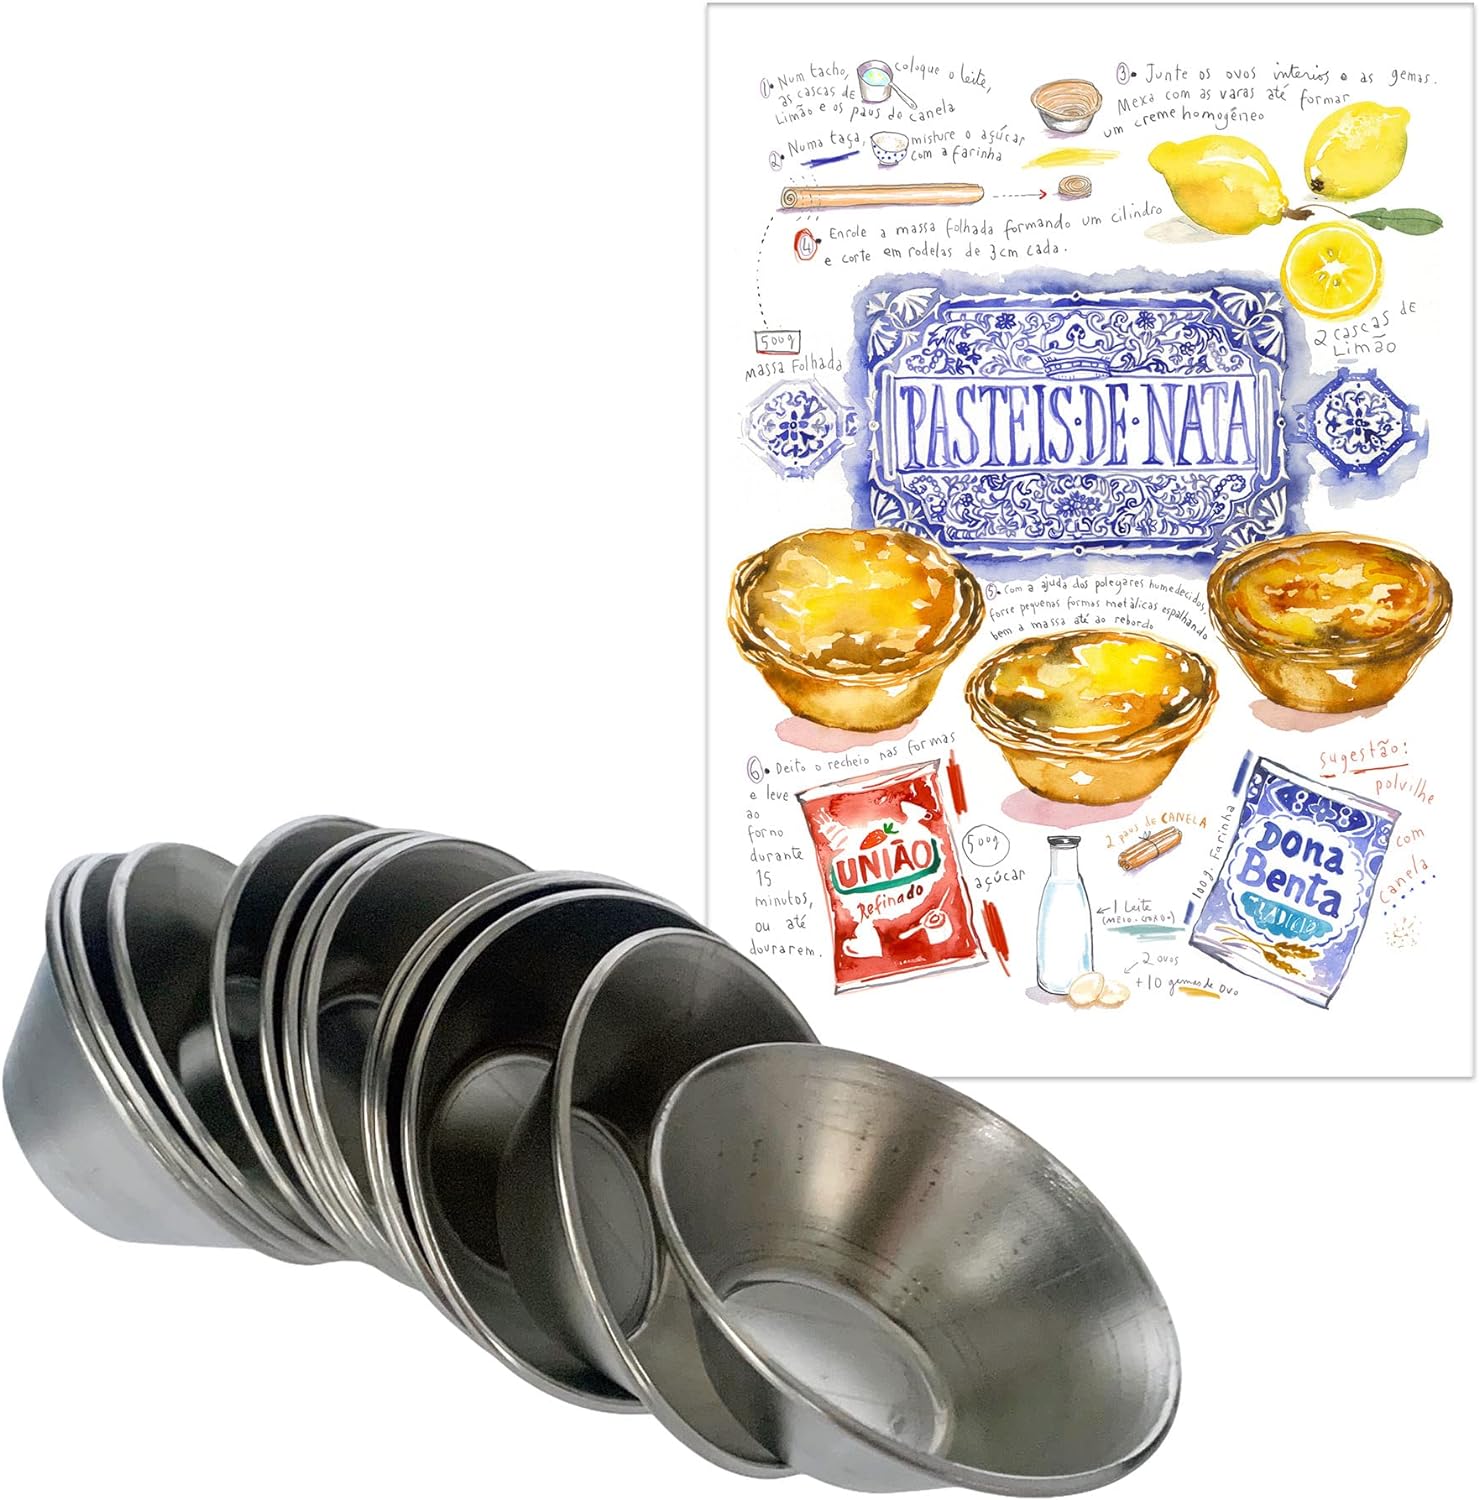 The Curated Pantry Pastel de Nata Tins Egg Tart Tins Made in Portugal out of Galvanized Steel Includes Pasteis de Nata Print Postcard from Amazon